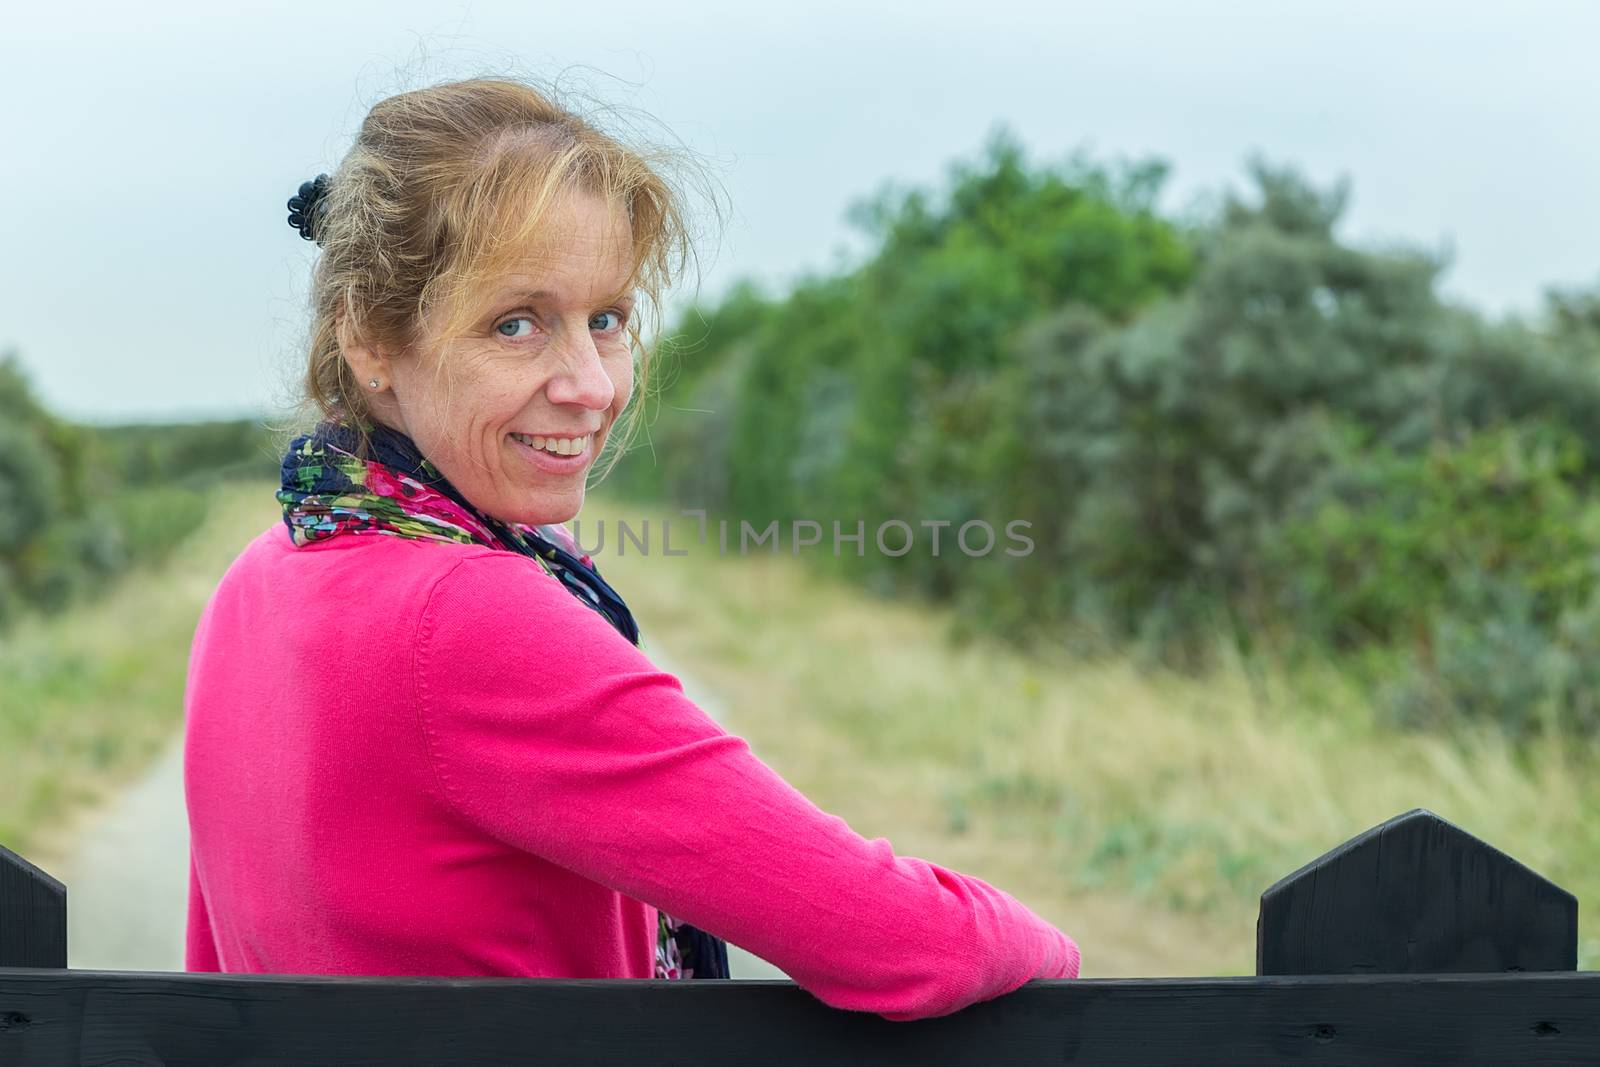 Portrait of middle aged caucasian woman at fence hiking in nature